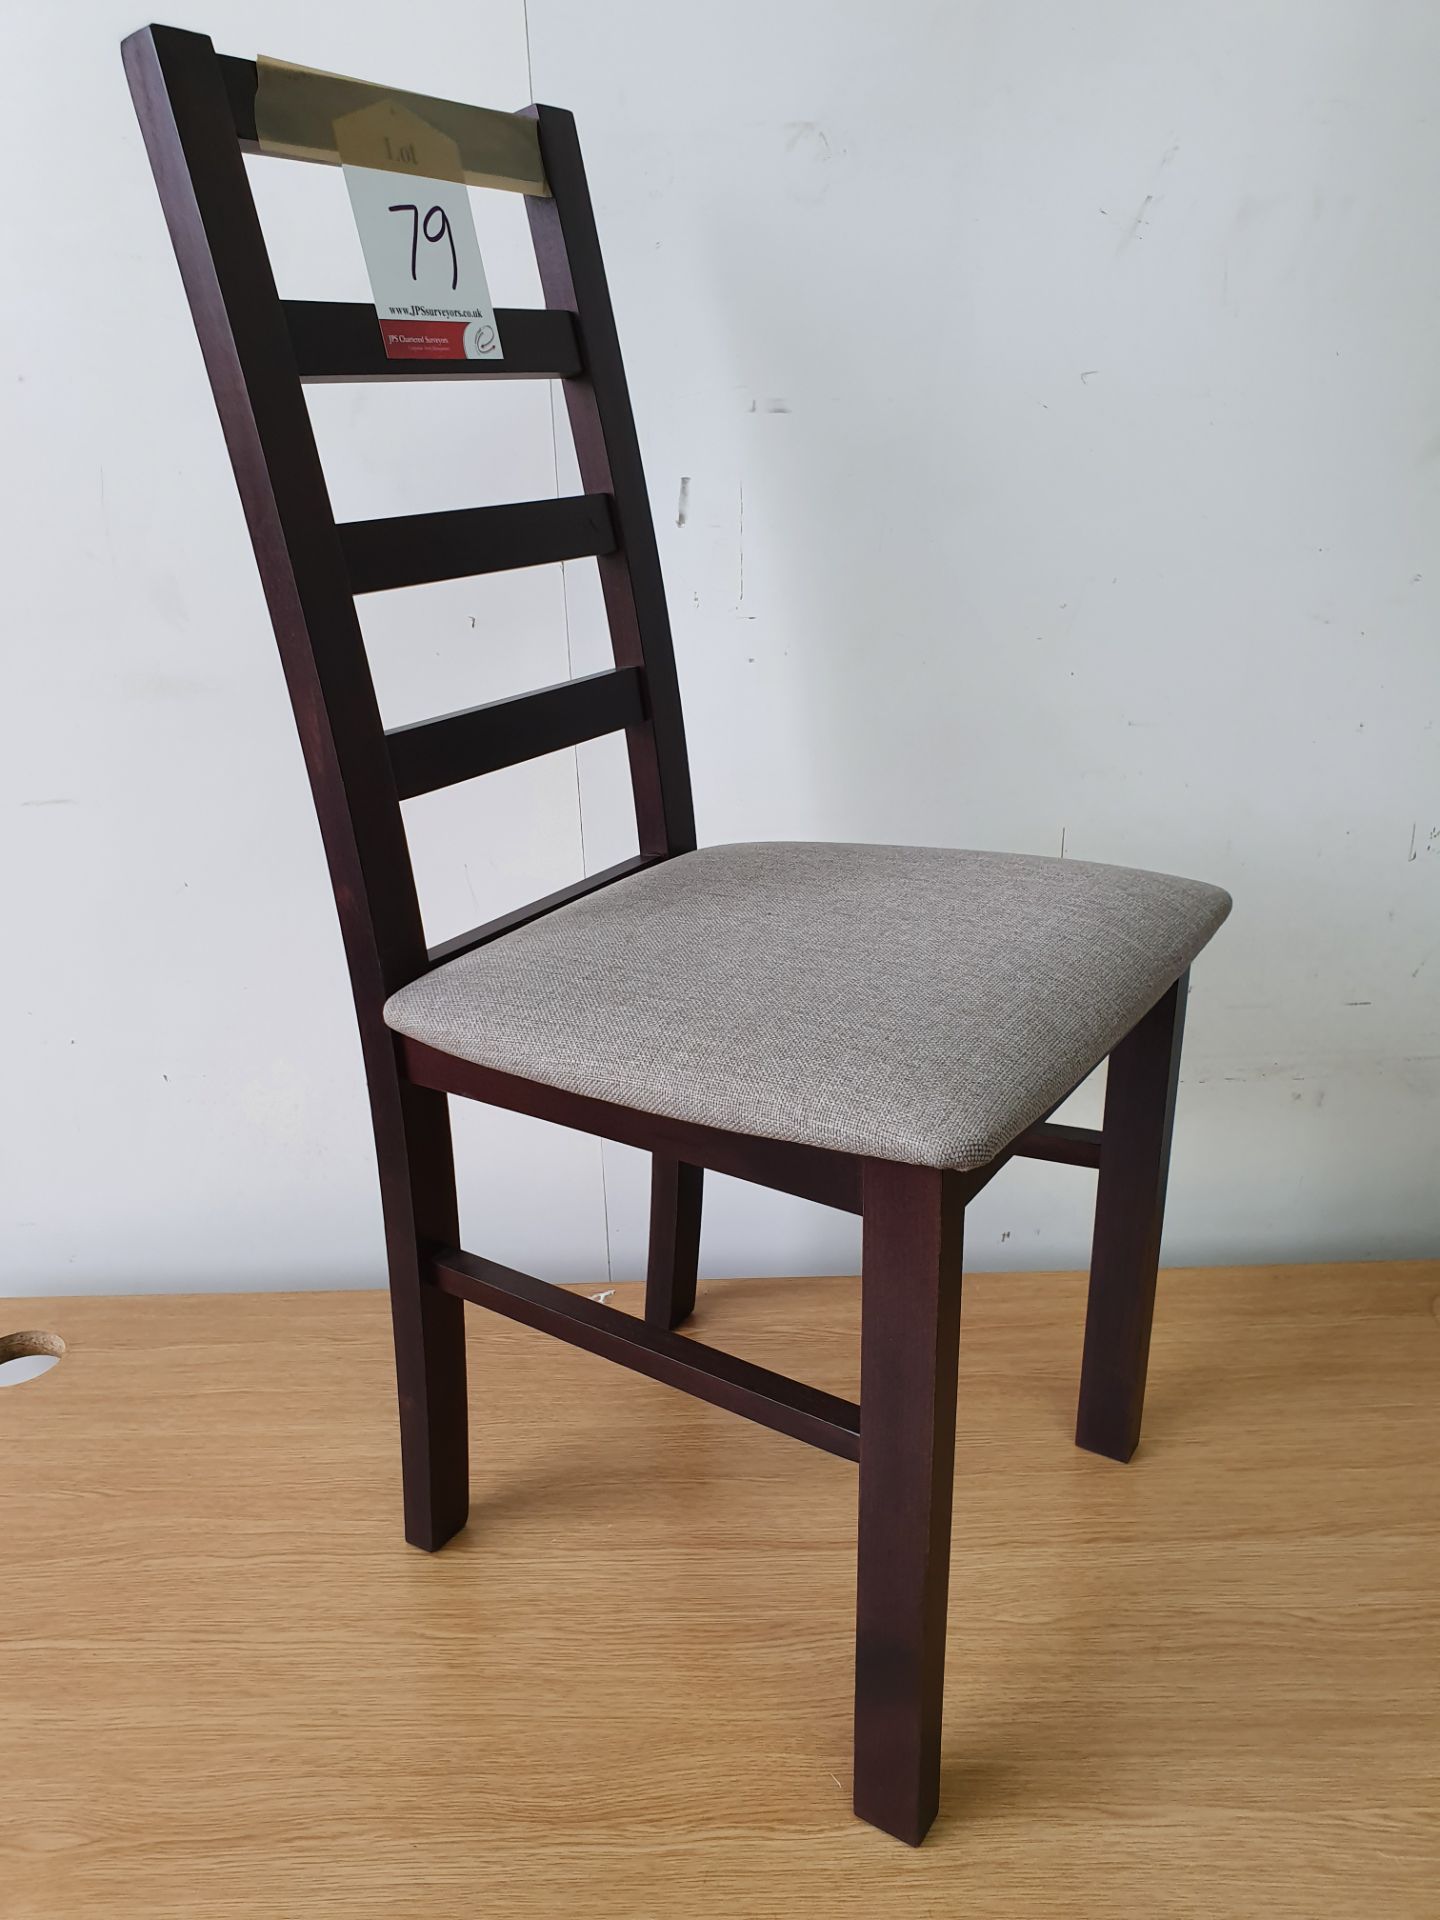 Wooden Dining Chair - Image 2 of 2